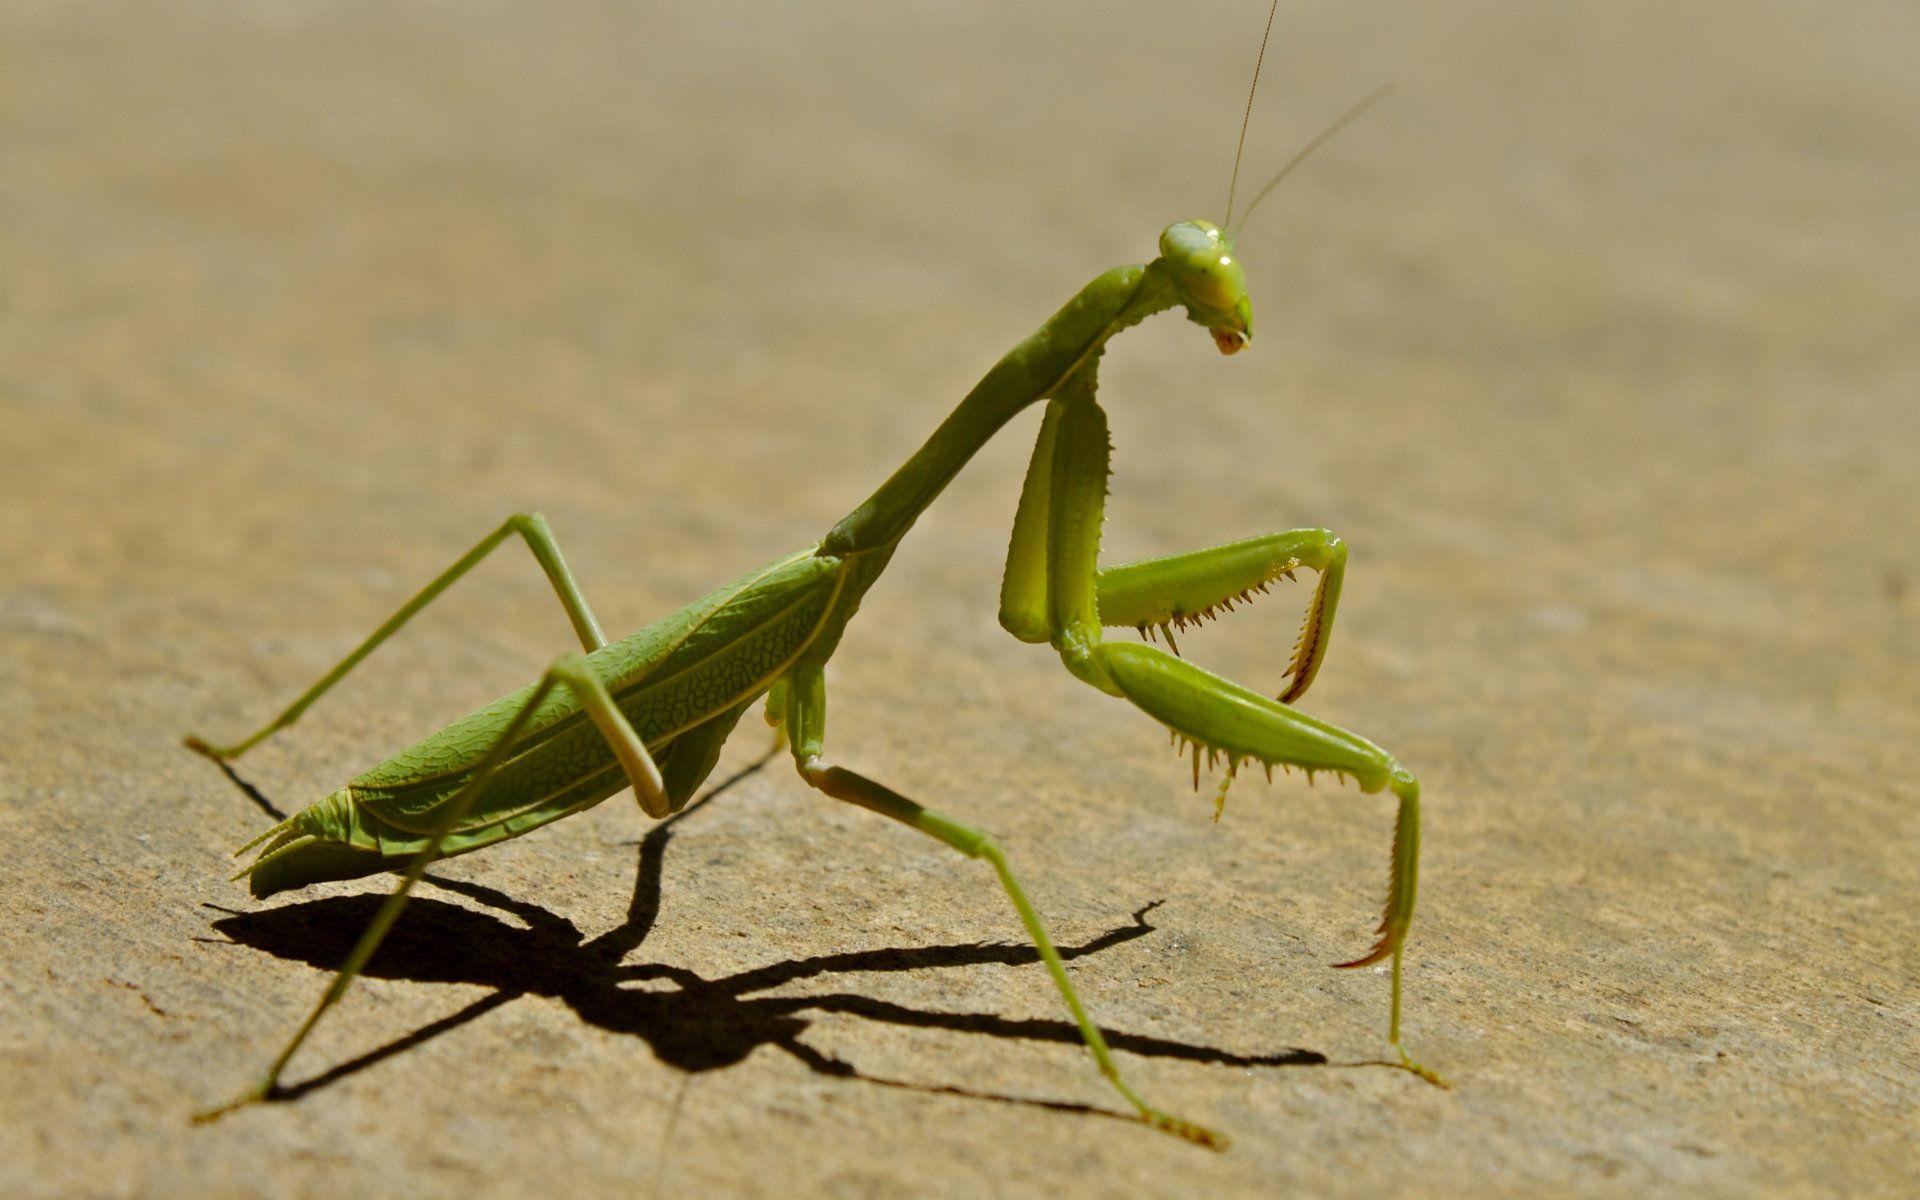 Mantis wallpapers hd, desktop backgrounds, images and pictures